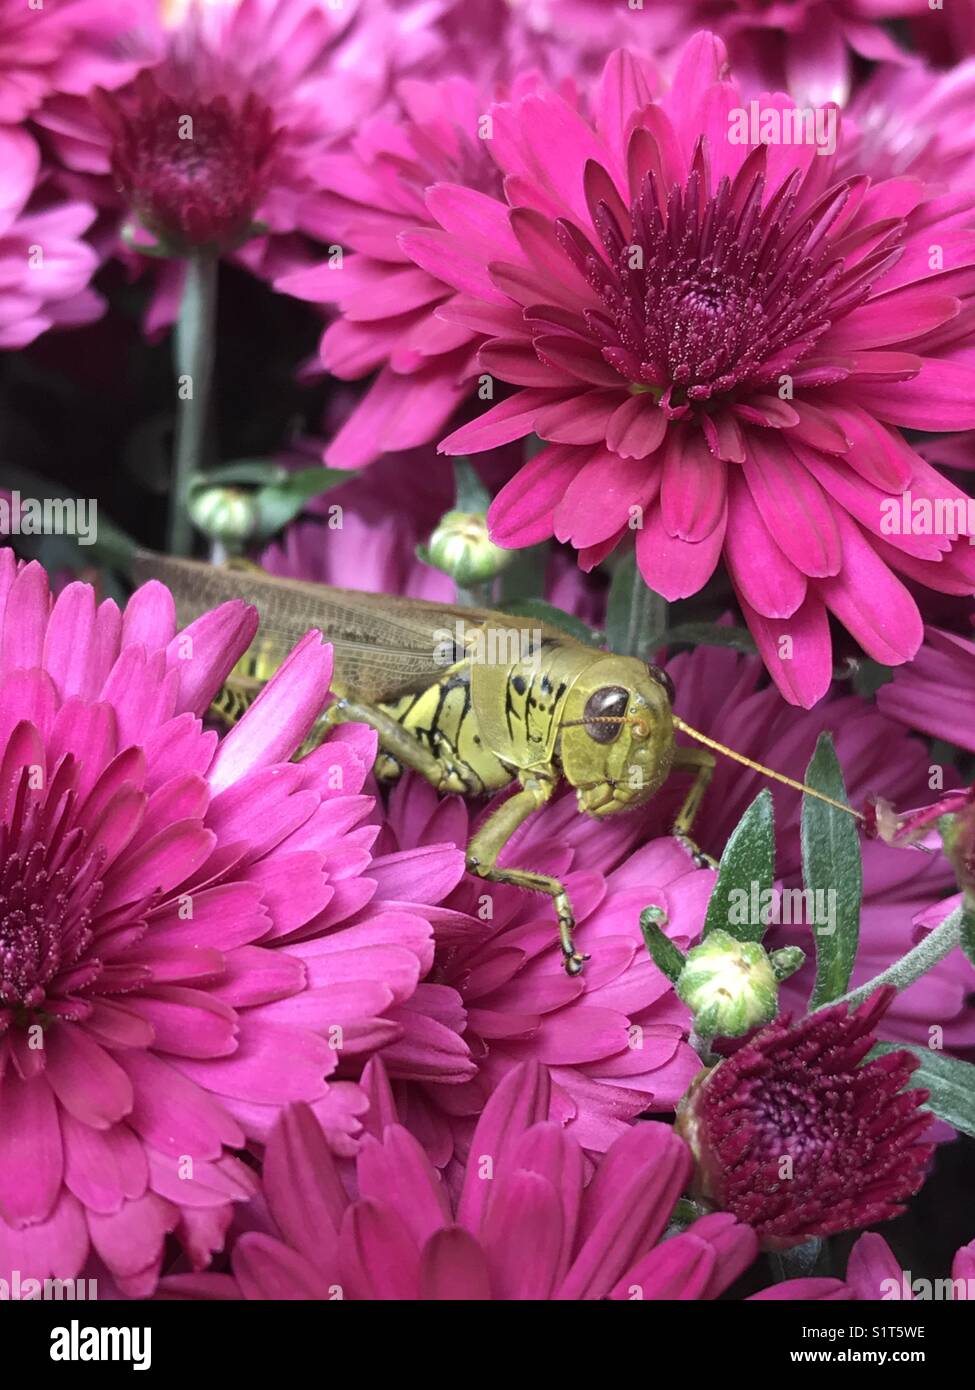 A green grasshopper peeking out from bright pink mums Stock Photo